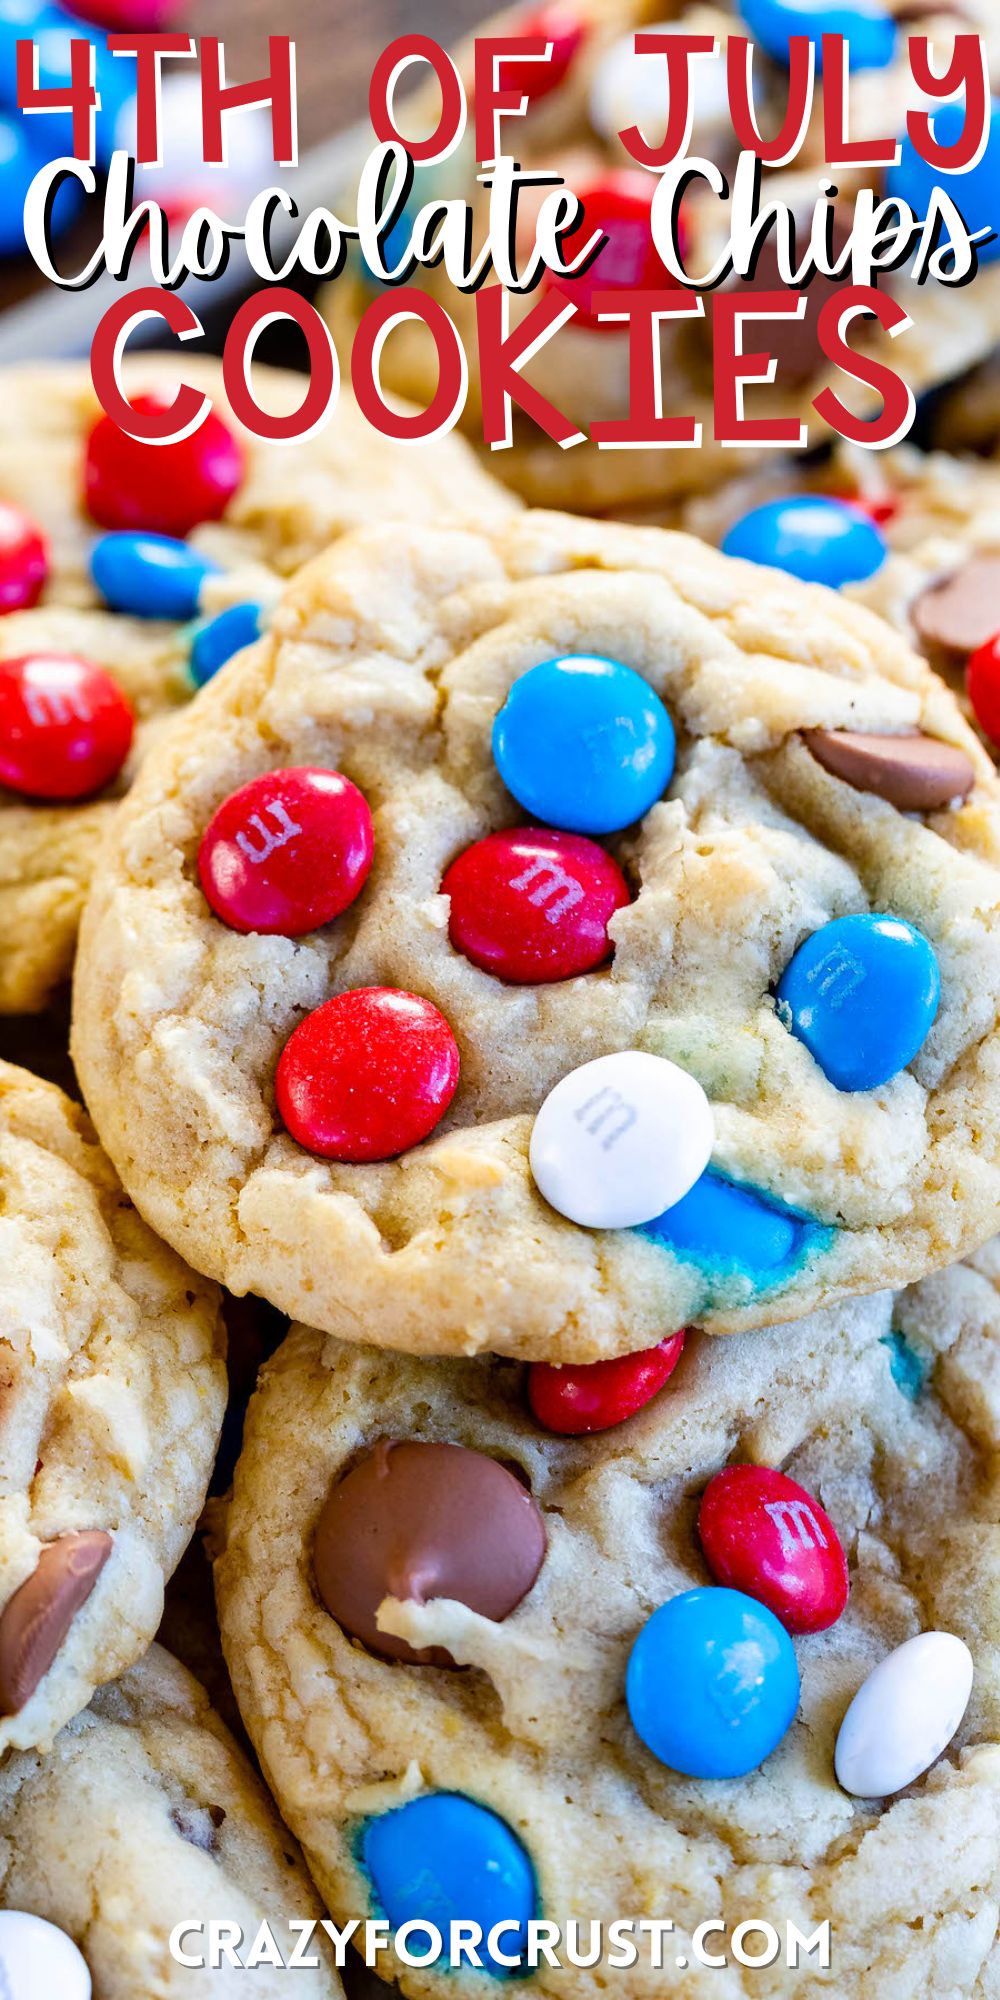 chocolate chip cookies and red white and blue m&ms baked in with words on the image.